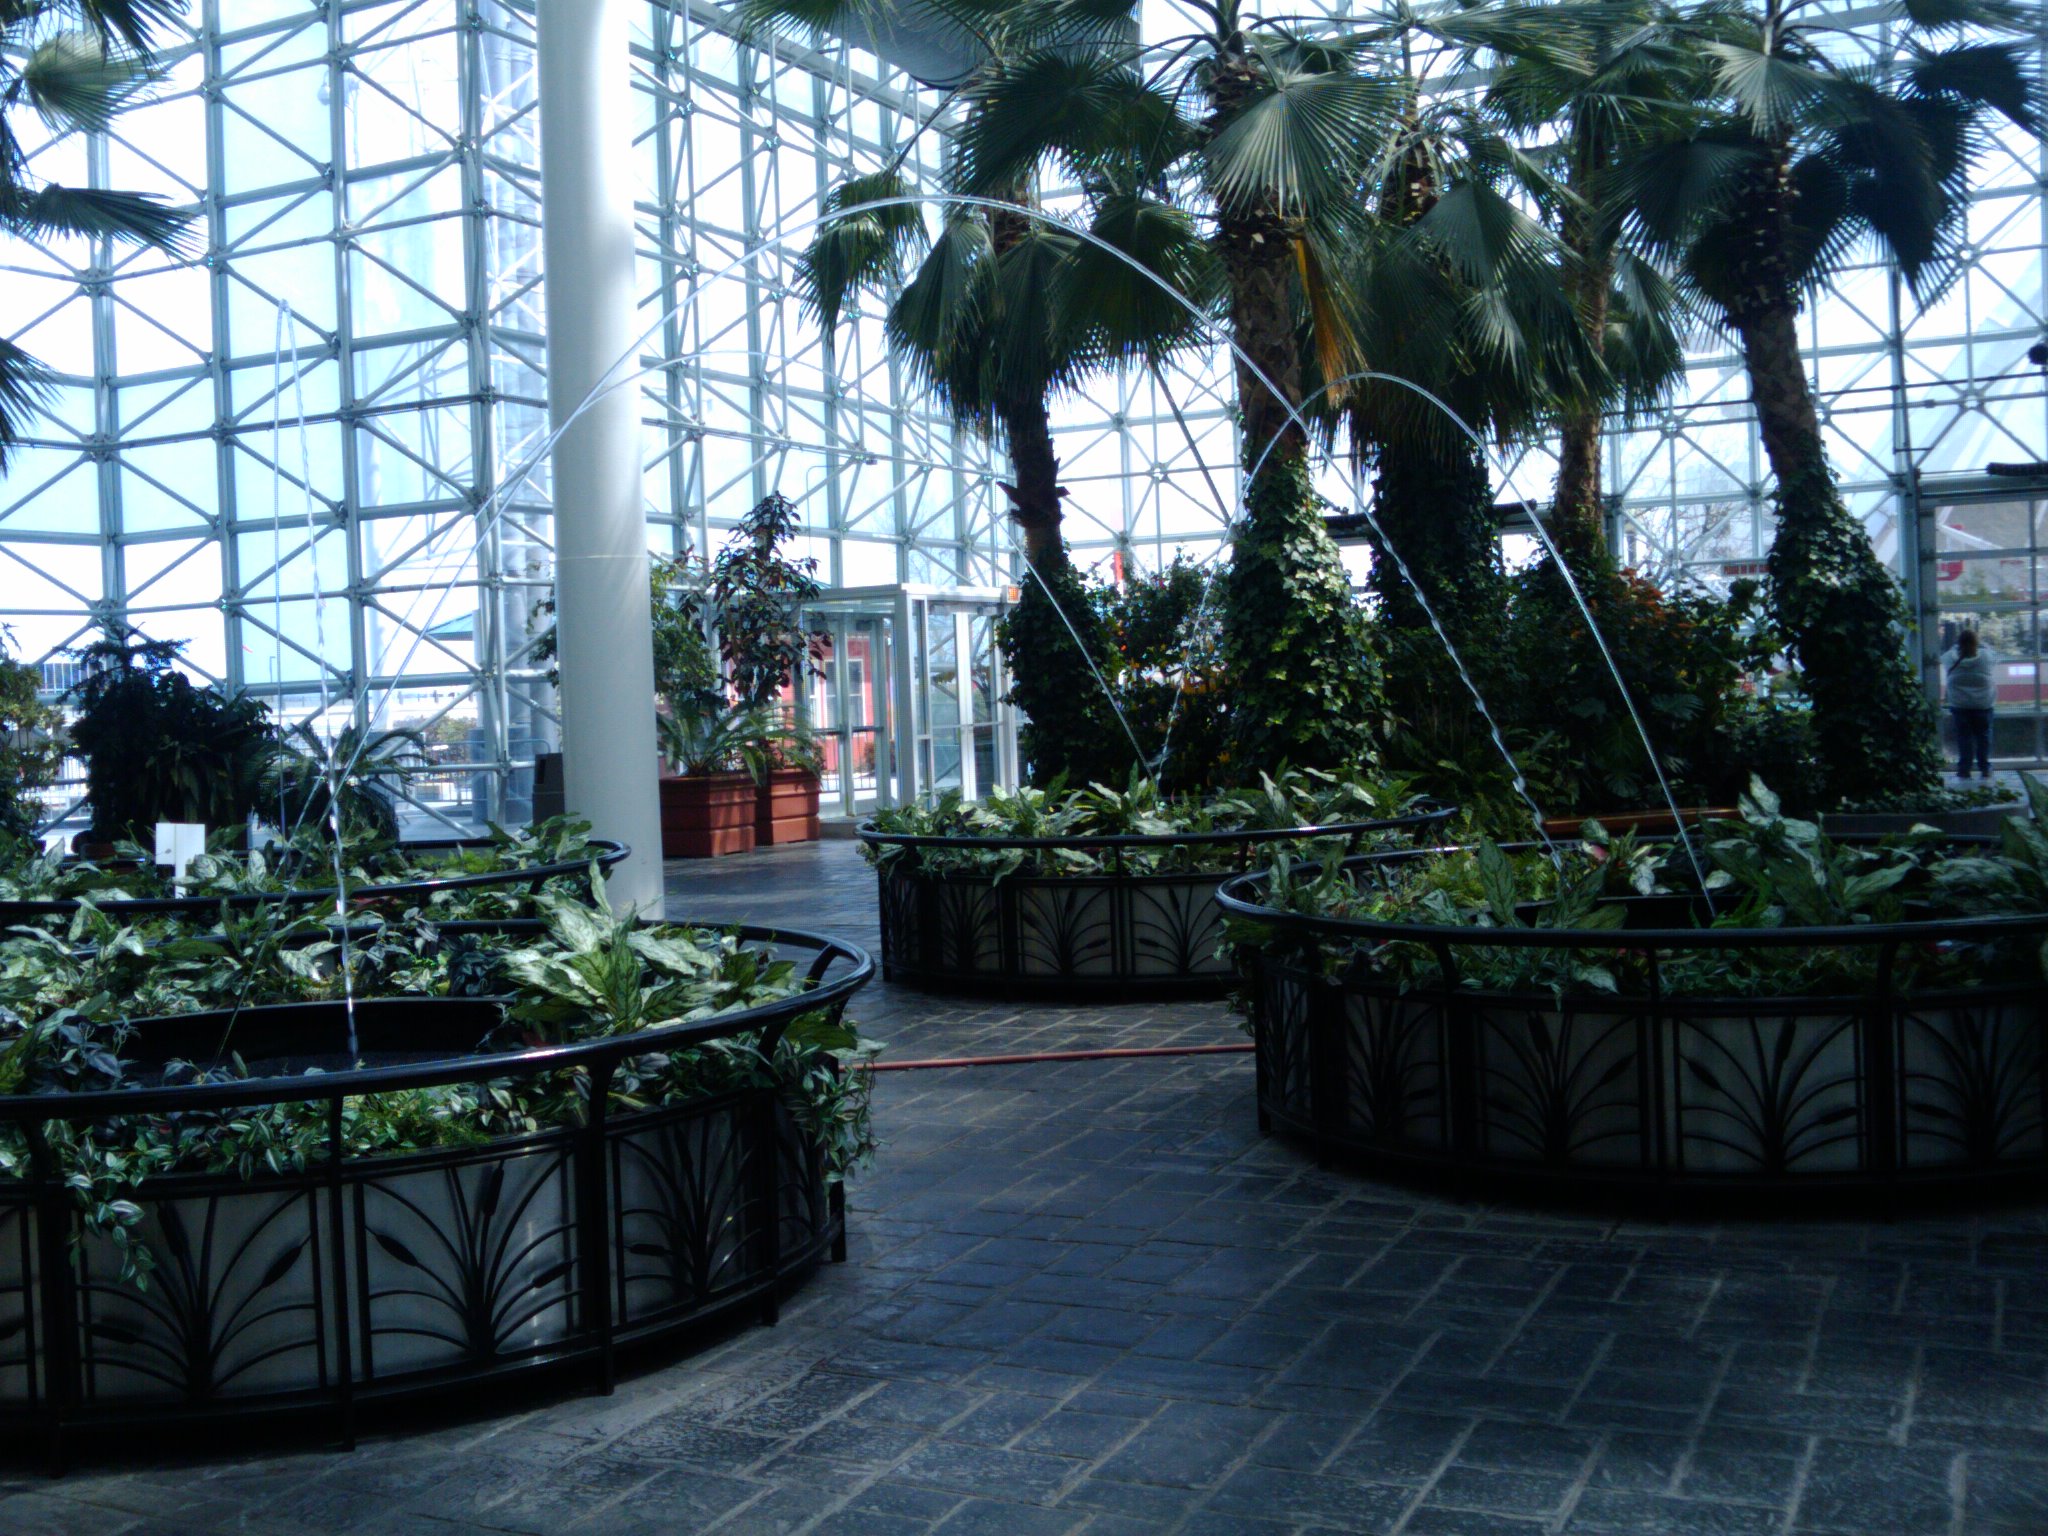 an inside view of a building with some plants